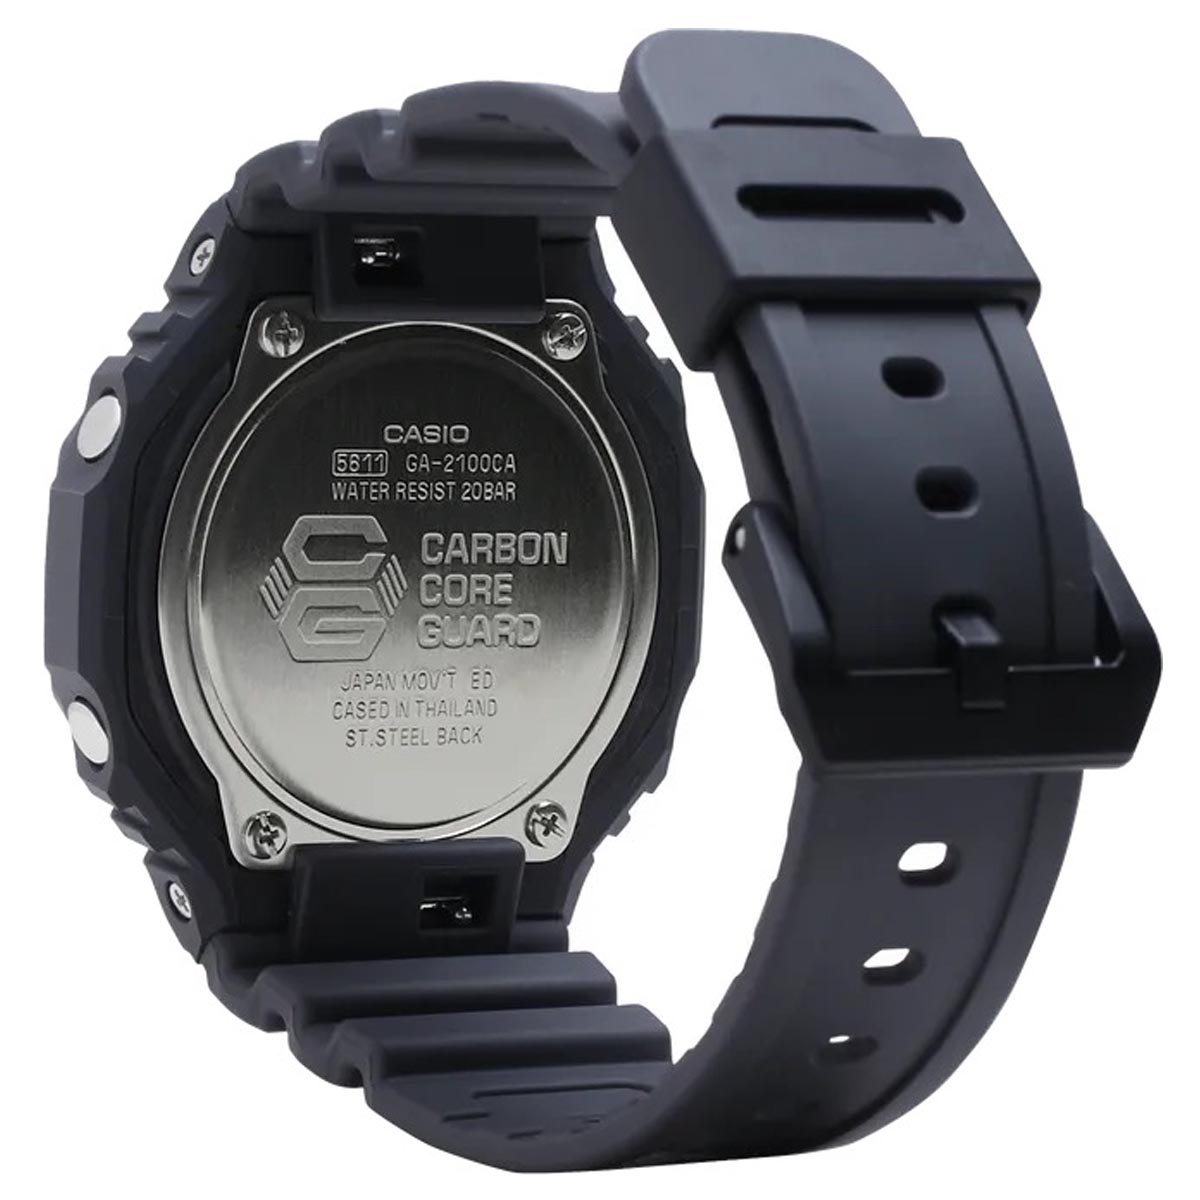 G Shock Mens Watch with Black and Grey Dial and Black Resin Strap (quartz movement)